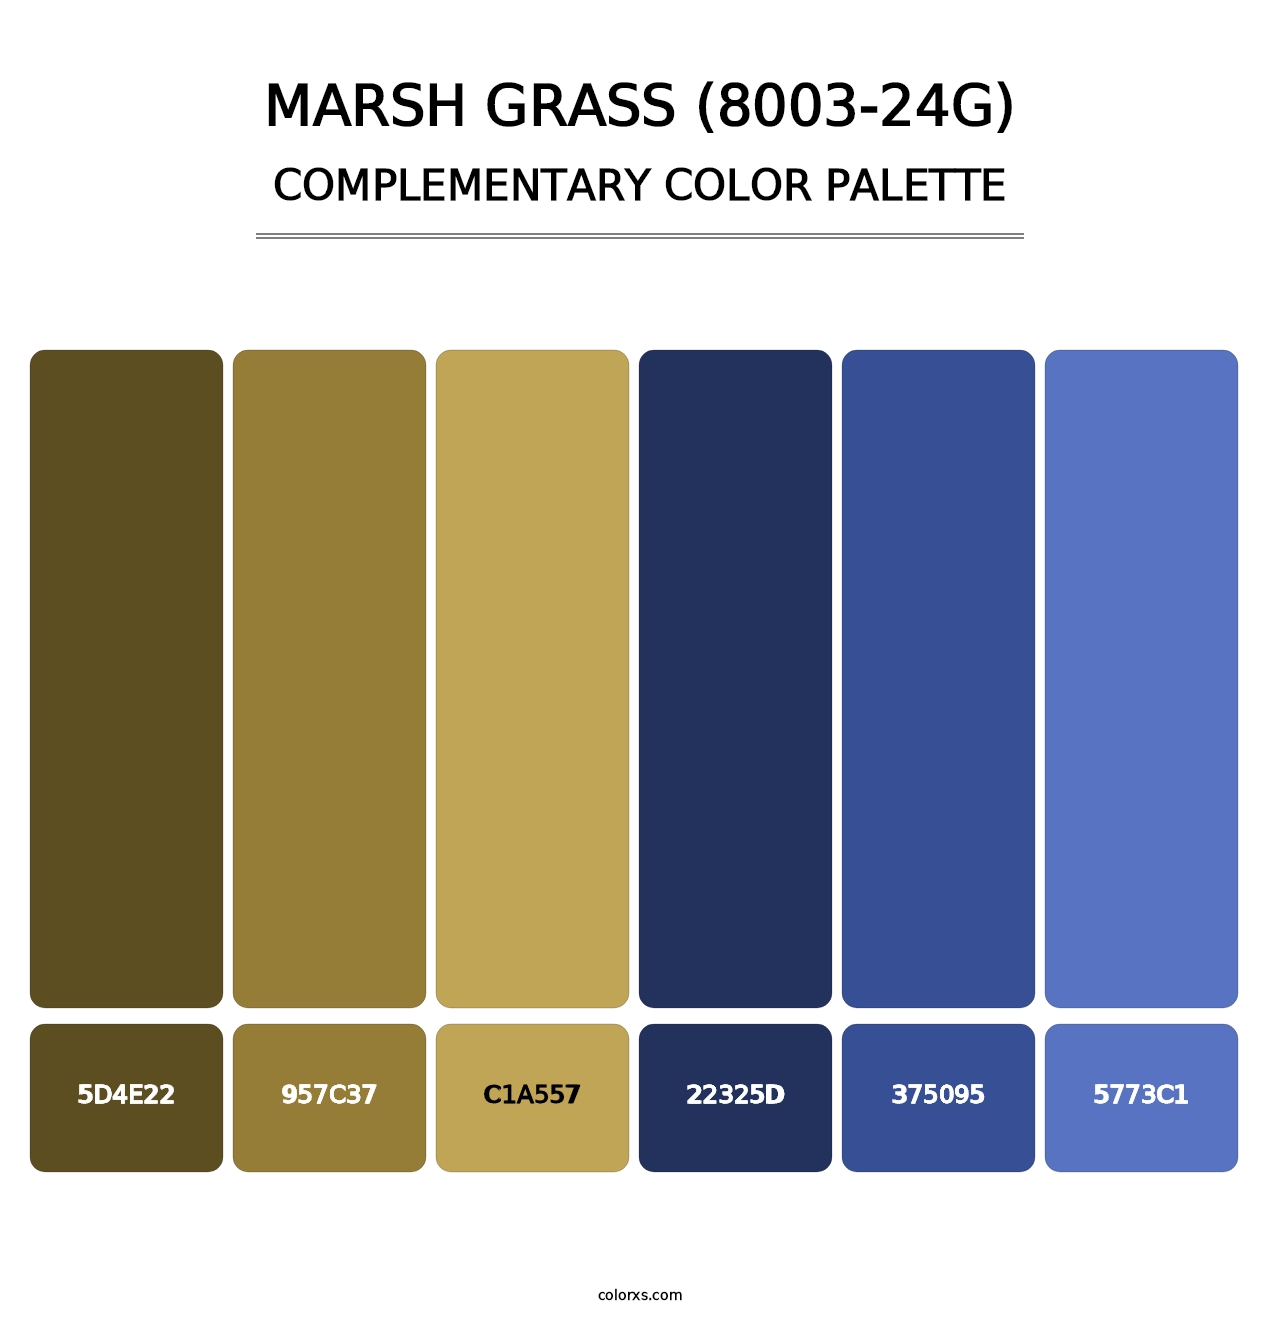 Marsh Grass (8003-24G) - Complementary Color Palette